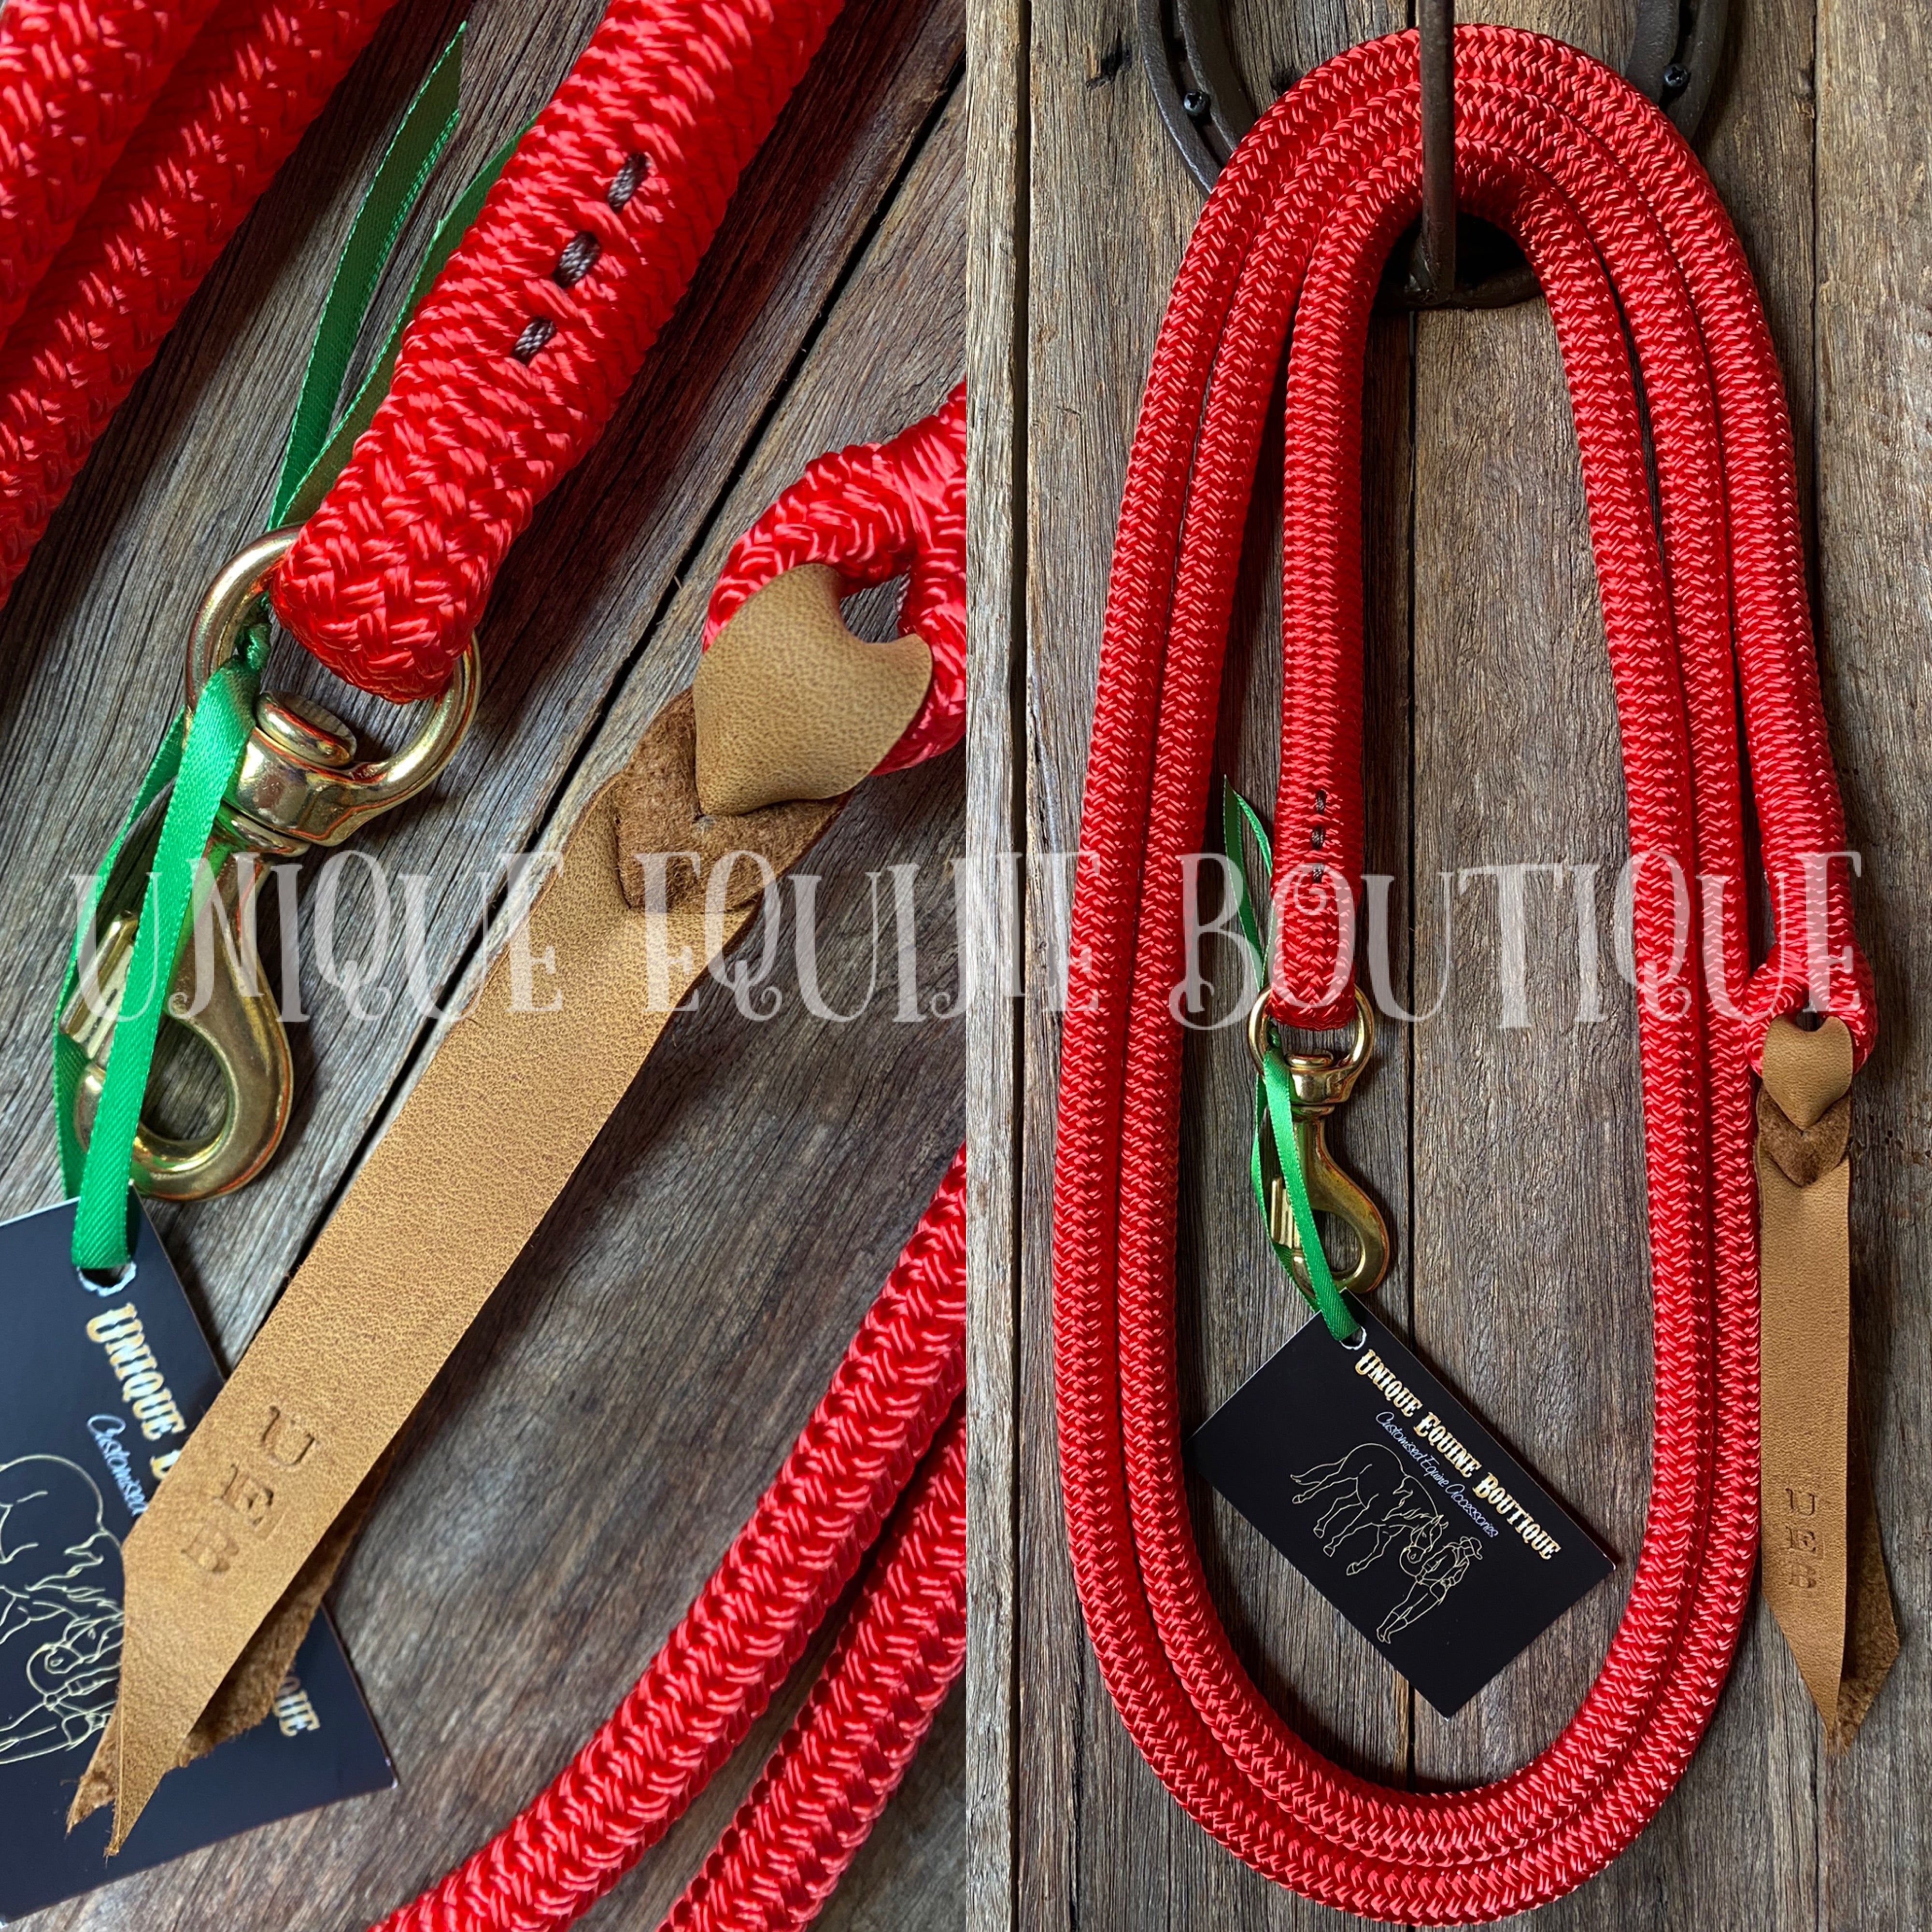 8ft Assorted Lead Ropes